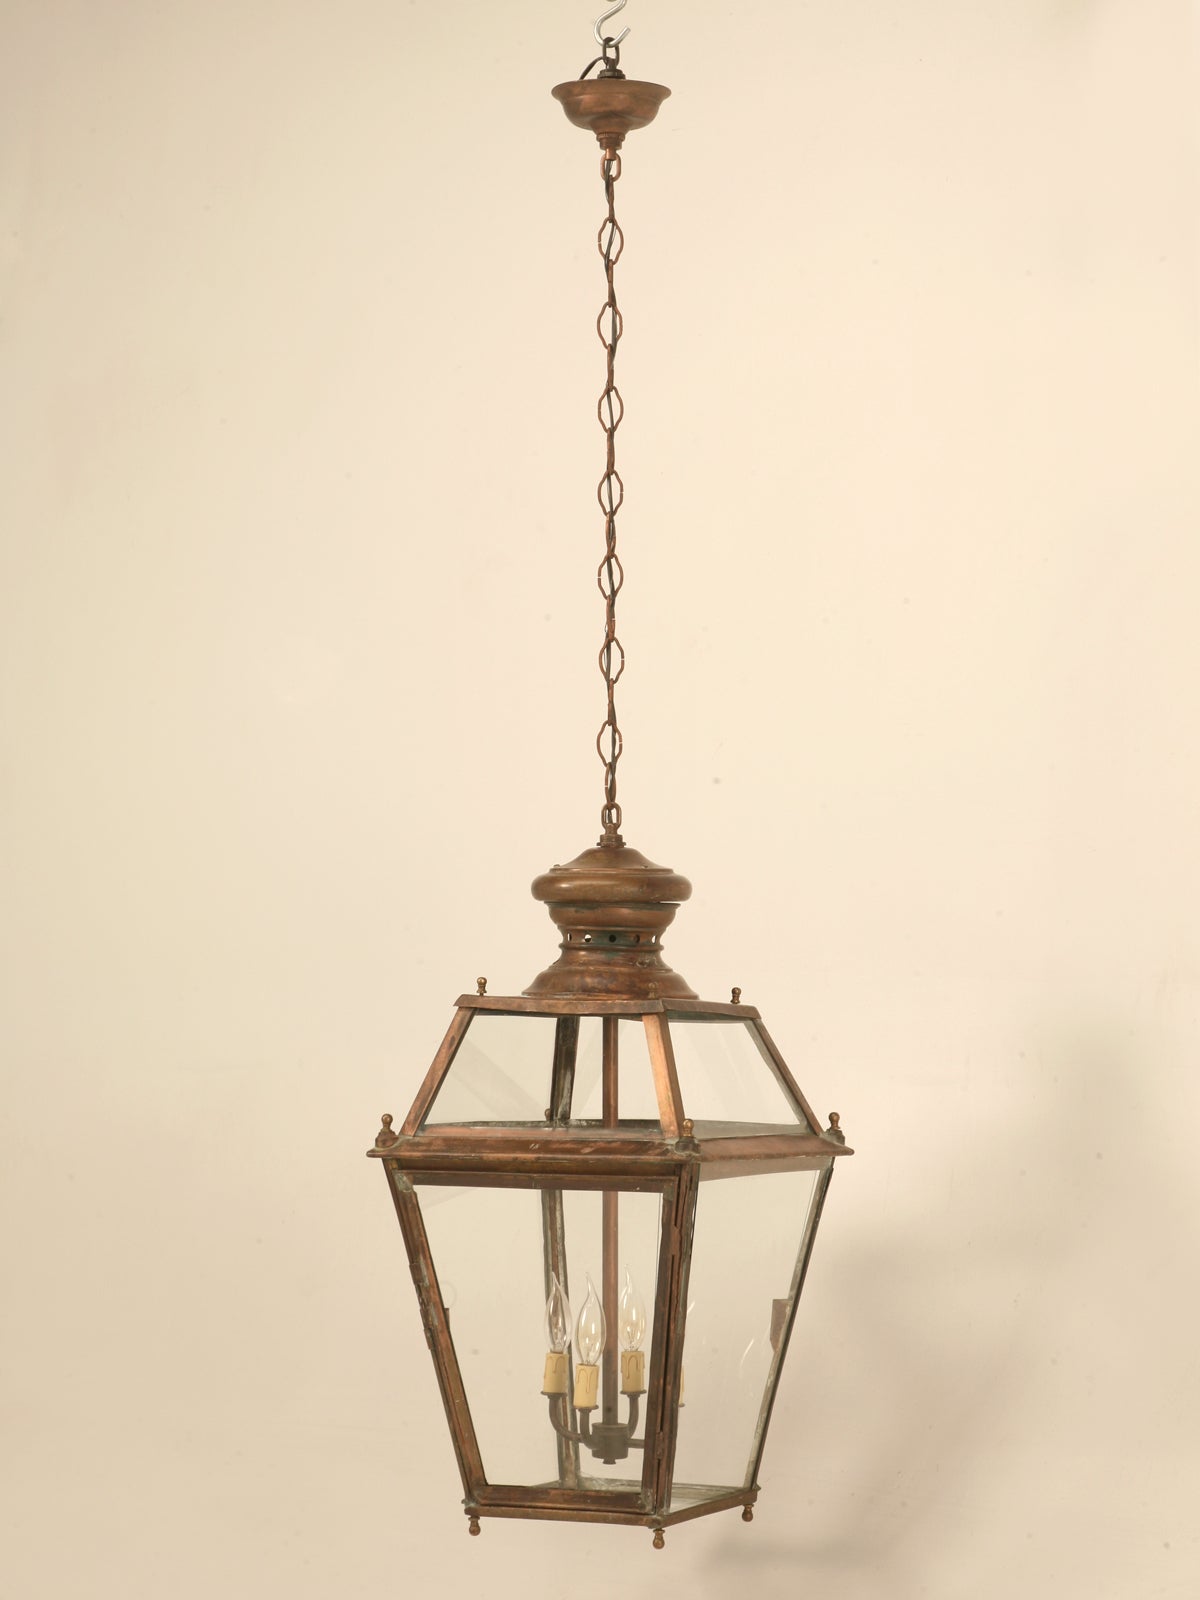 Incredible Antique French Copper Hanging Pendant Lantern-Just Rewired